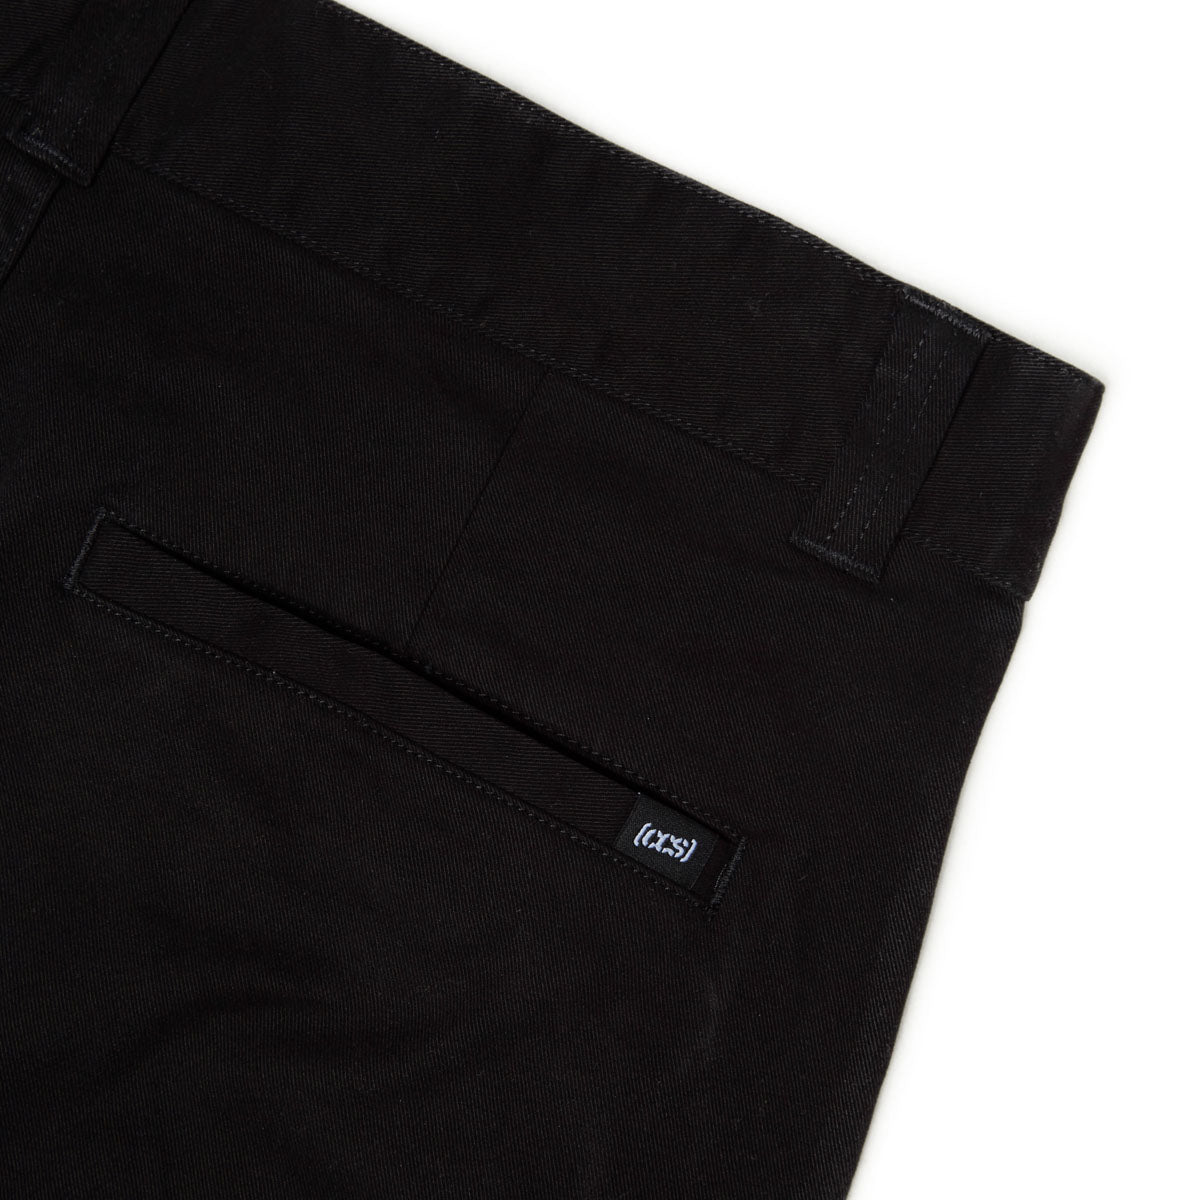 CCS Standard Plus Relaxed Chino Pants - Black image 6